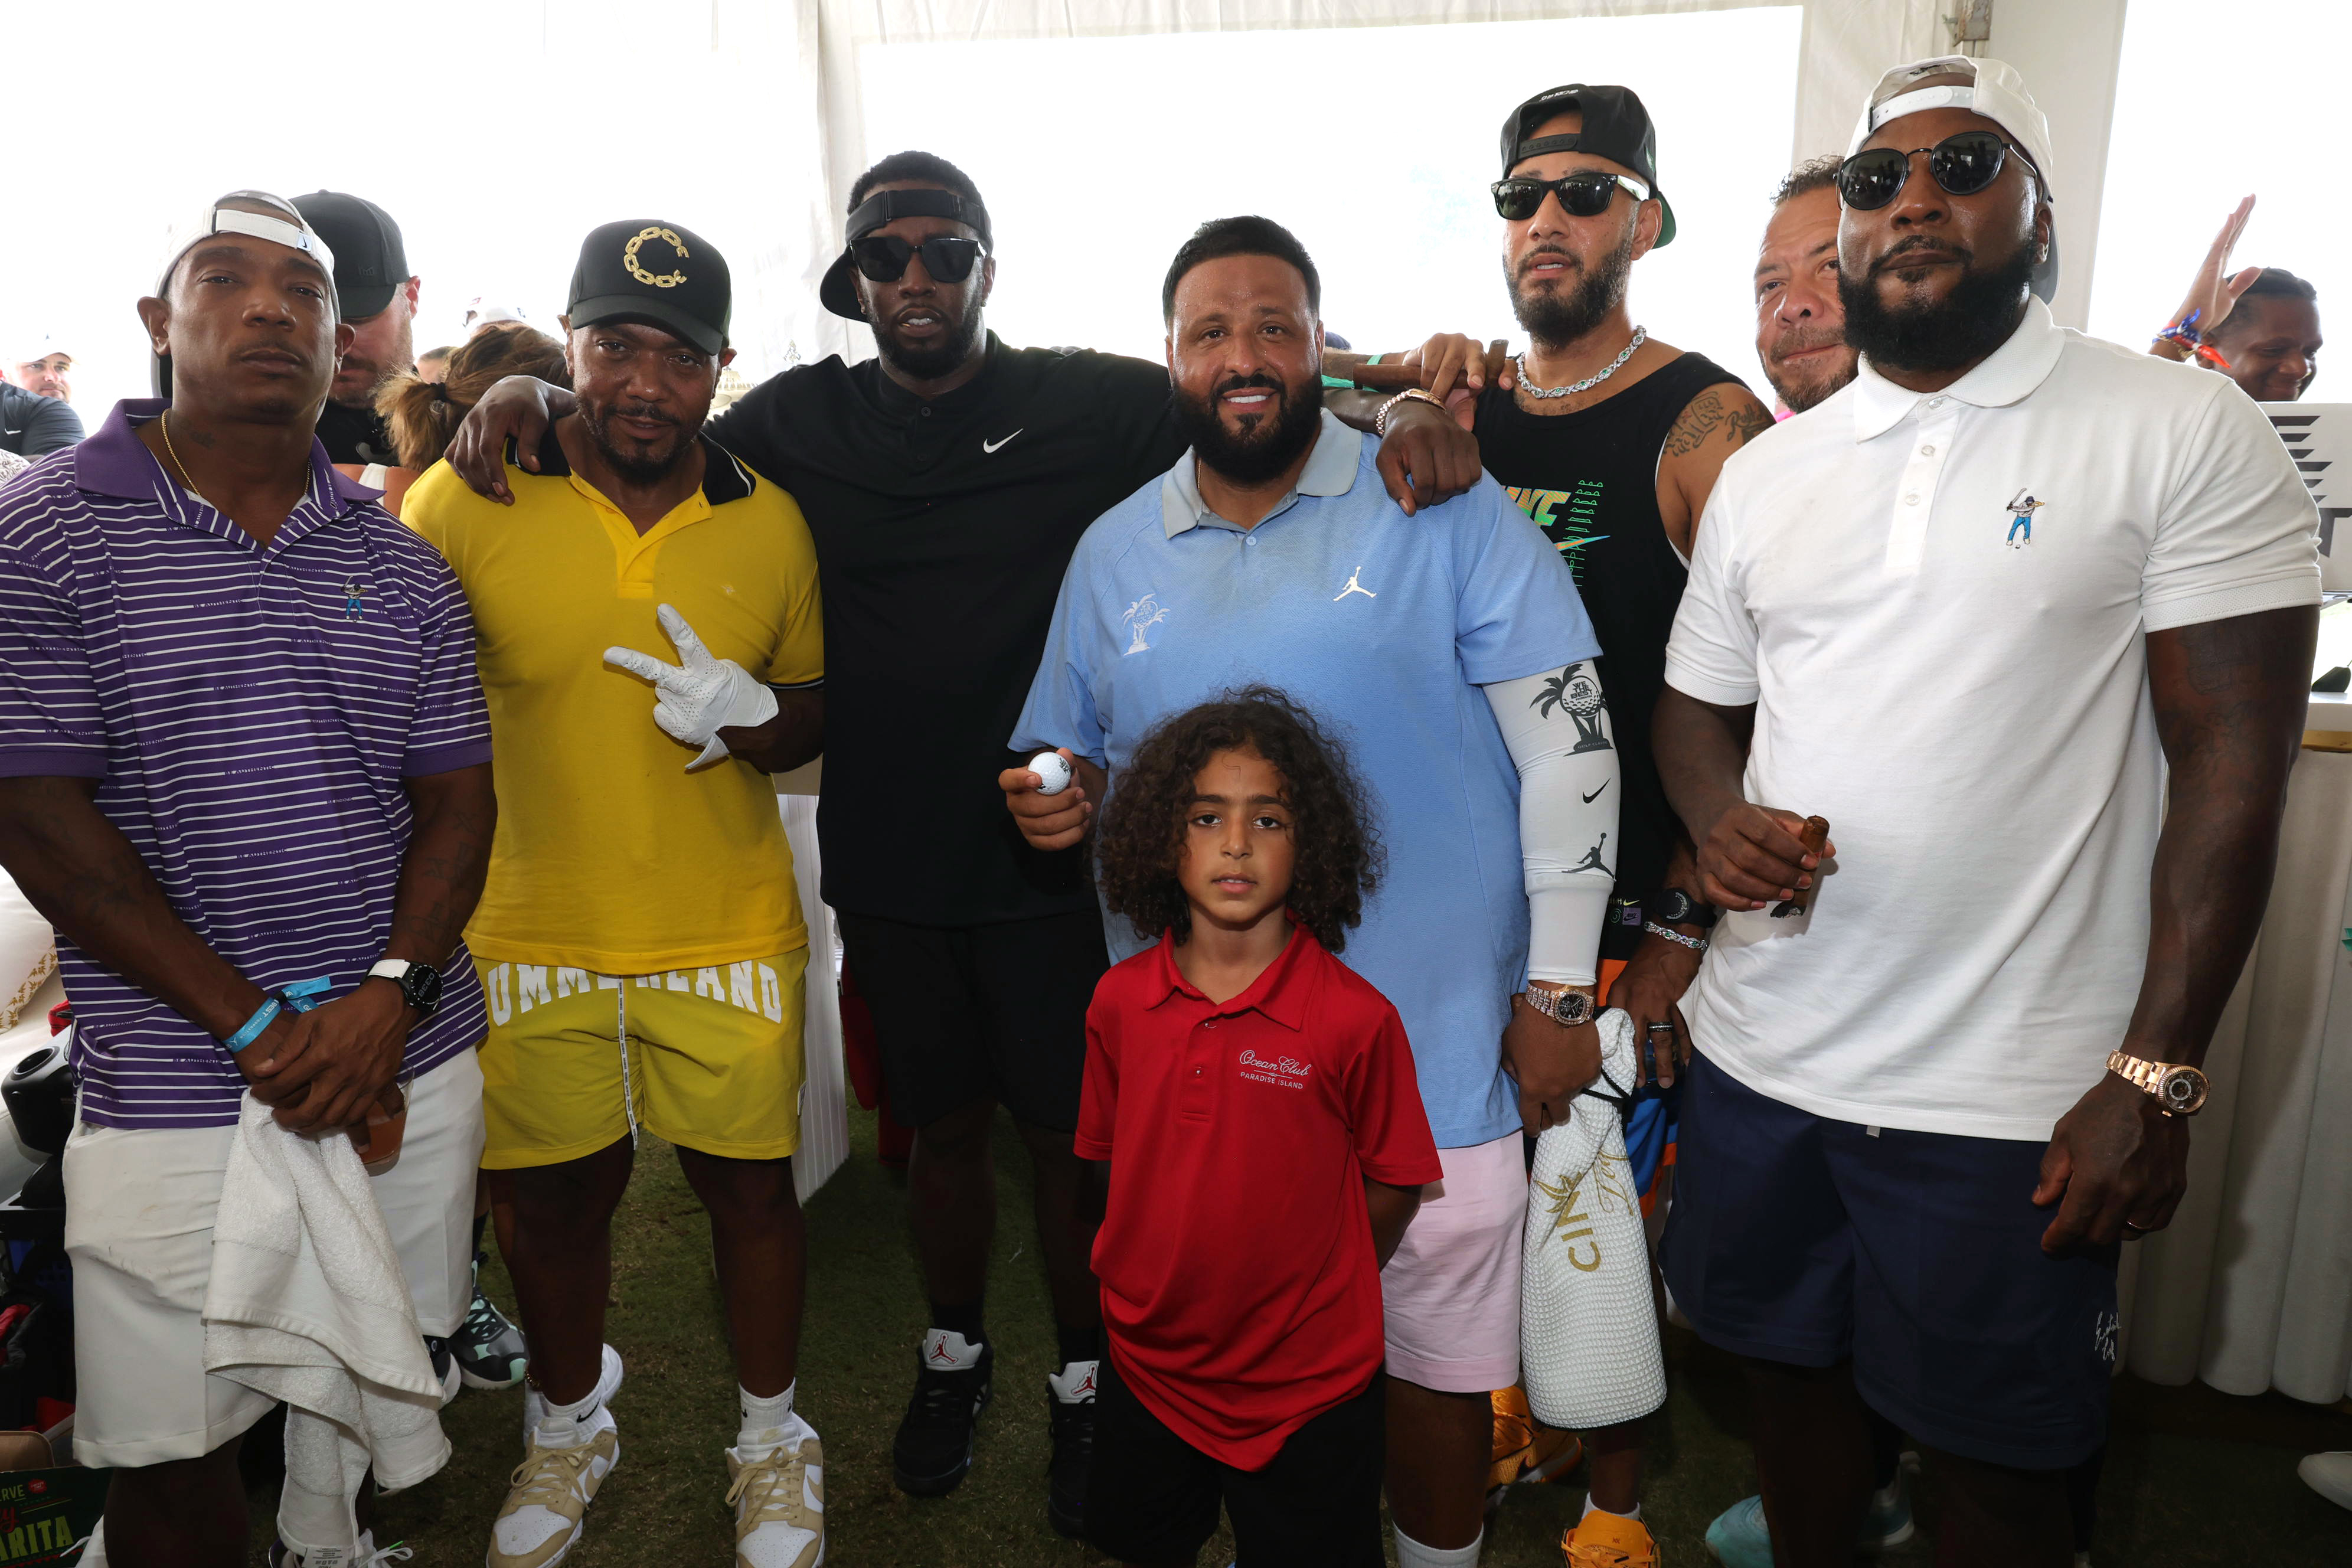 Jeezy at an event with DJ Khaled, Swizz Beats, Diddy, and Ja Rule